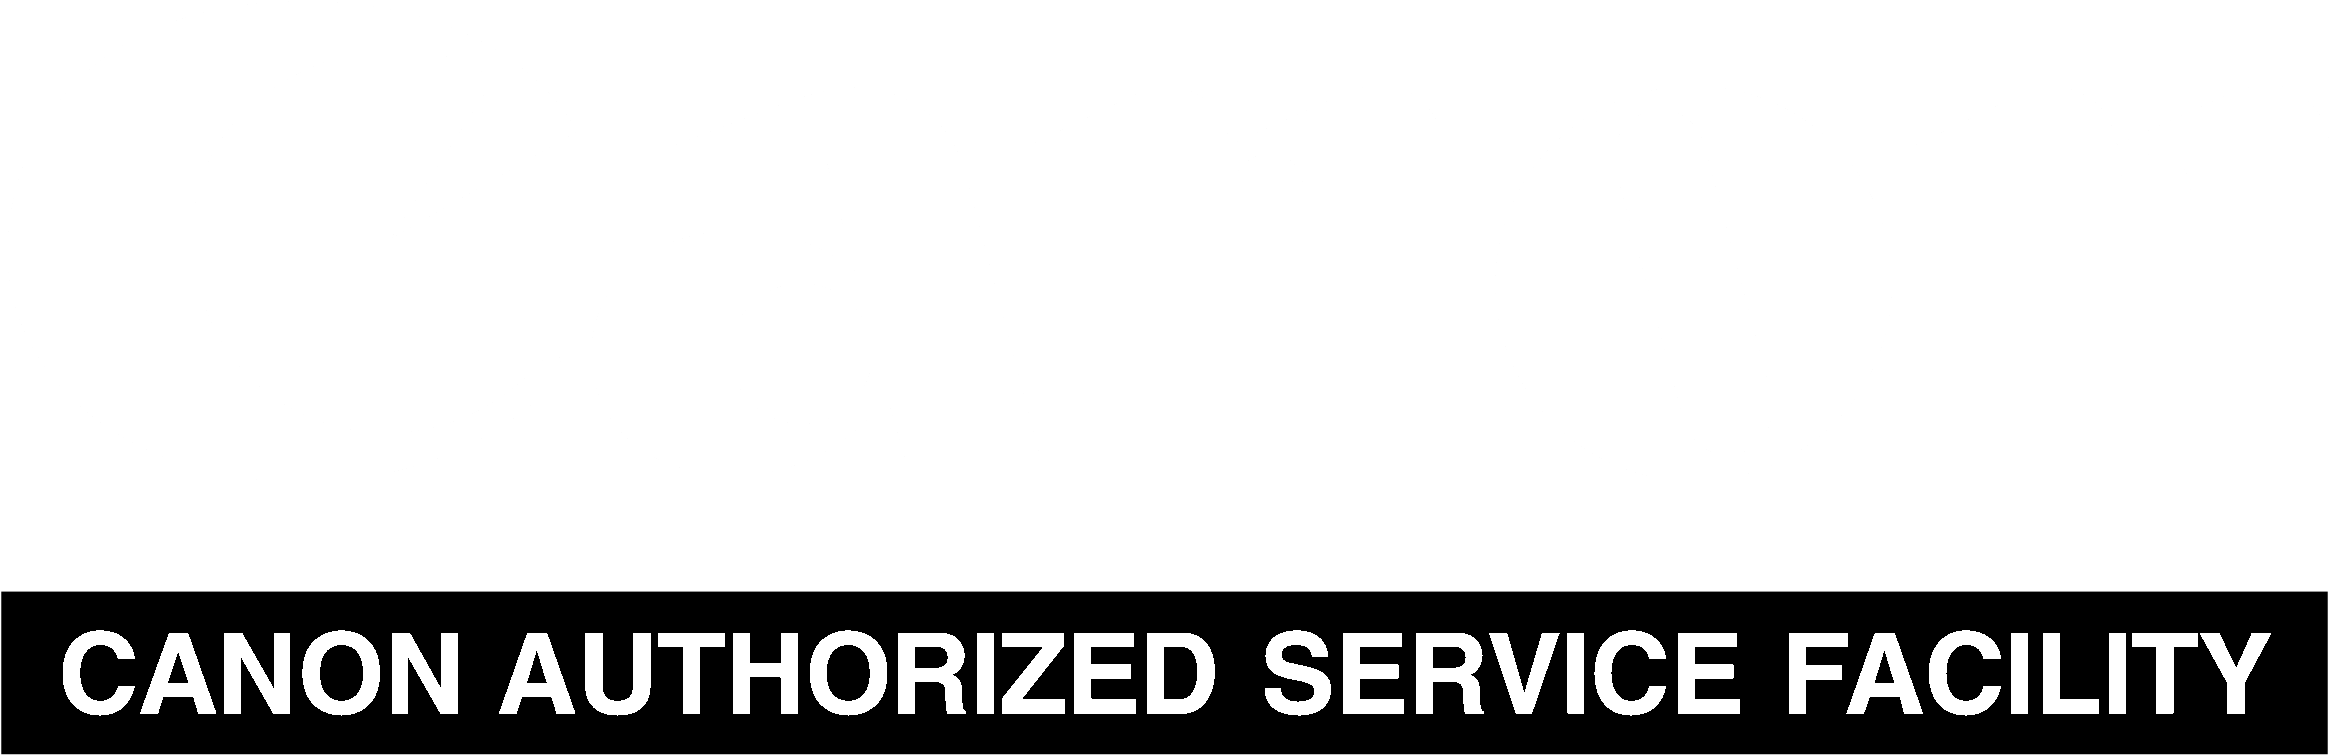 Canon Authorized Service Facility Logo PNG